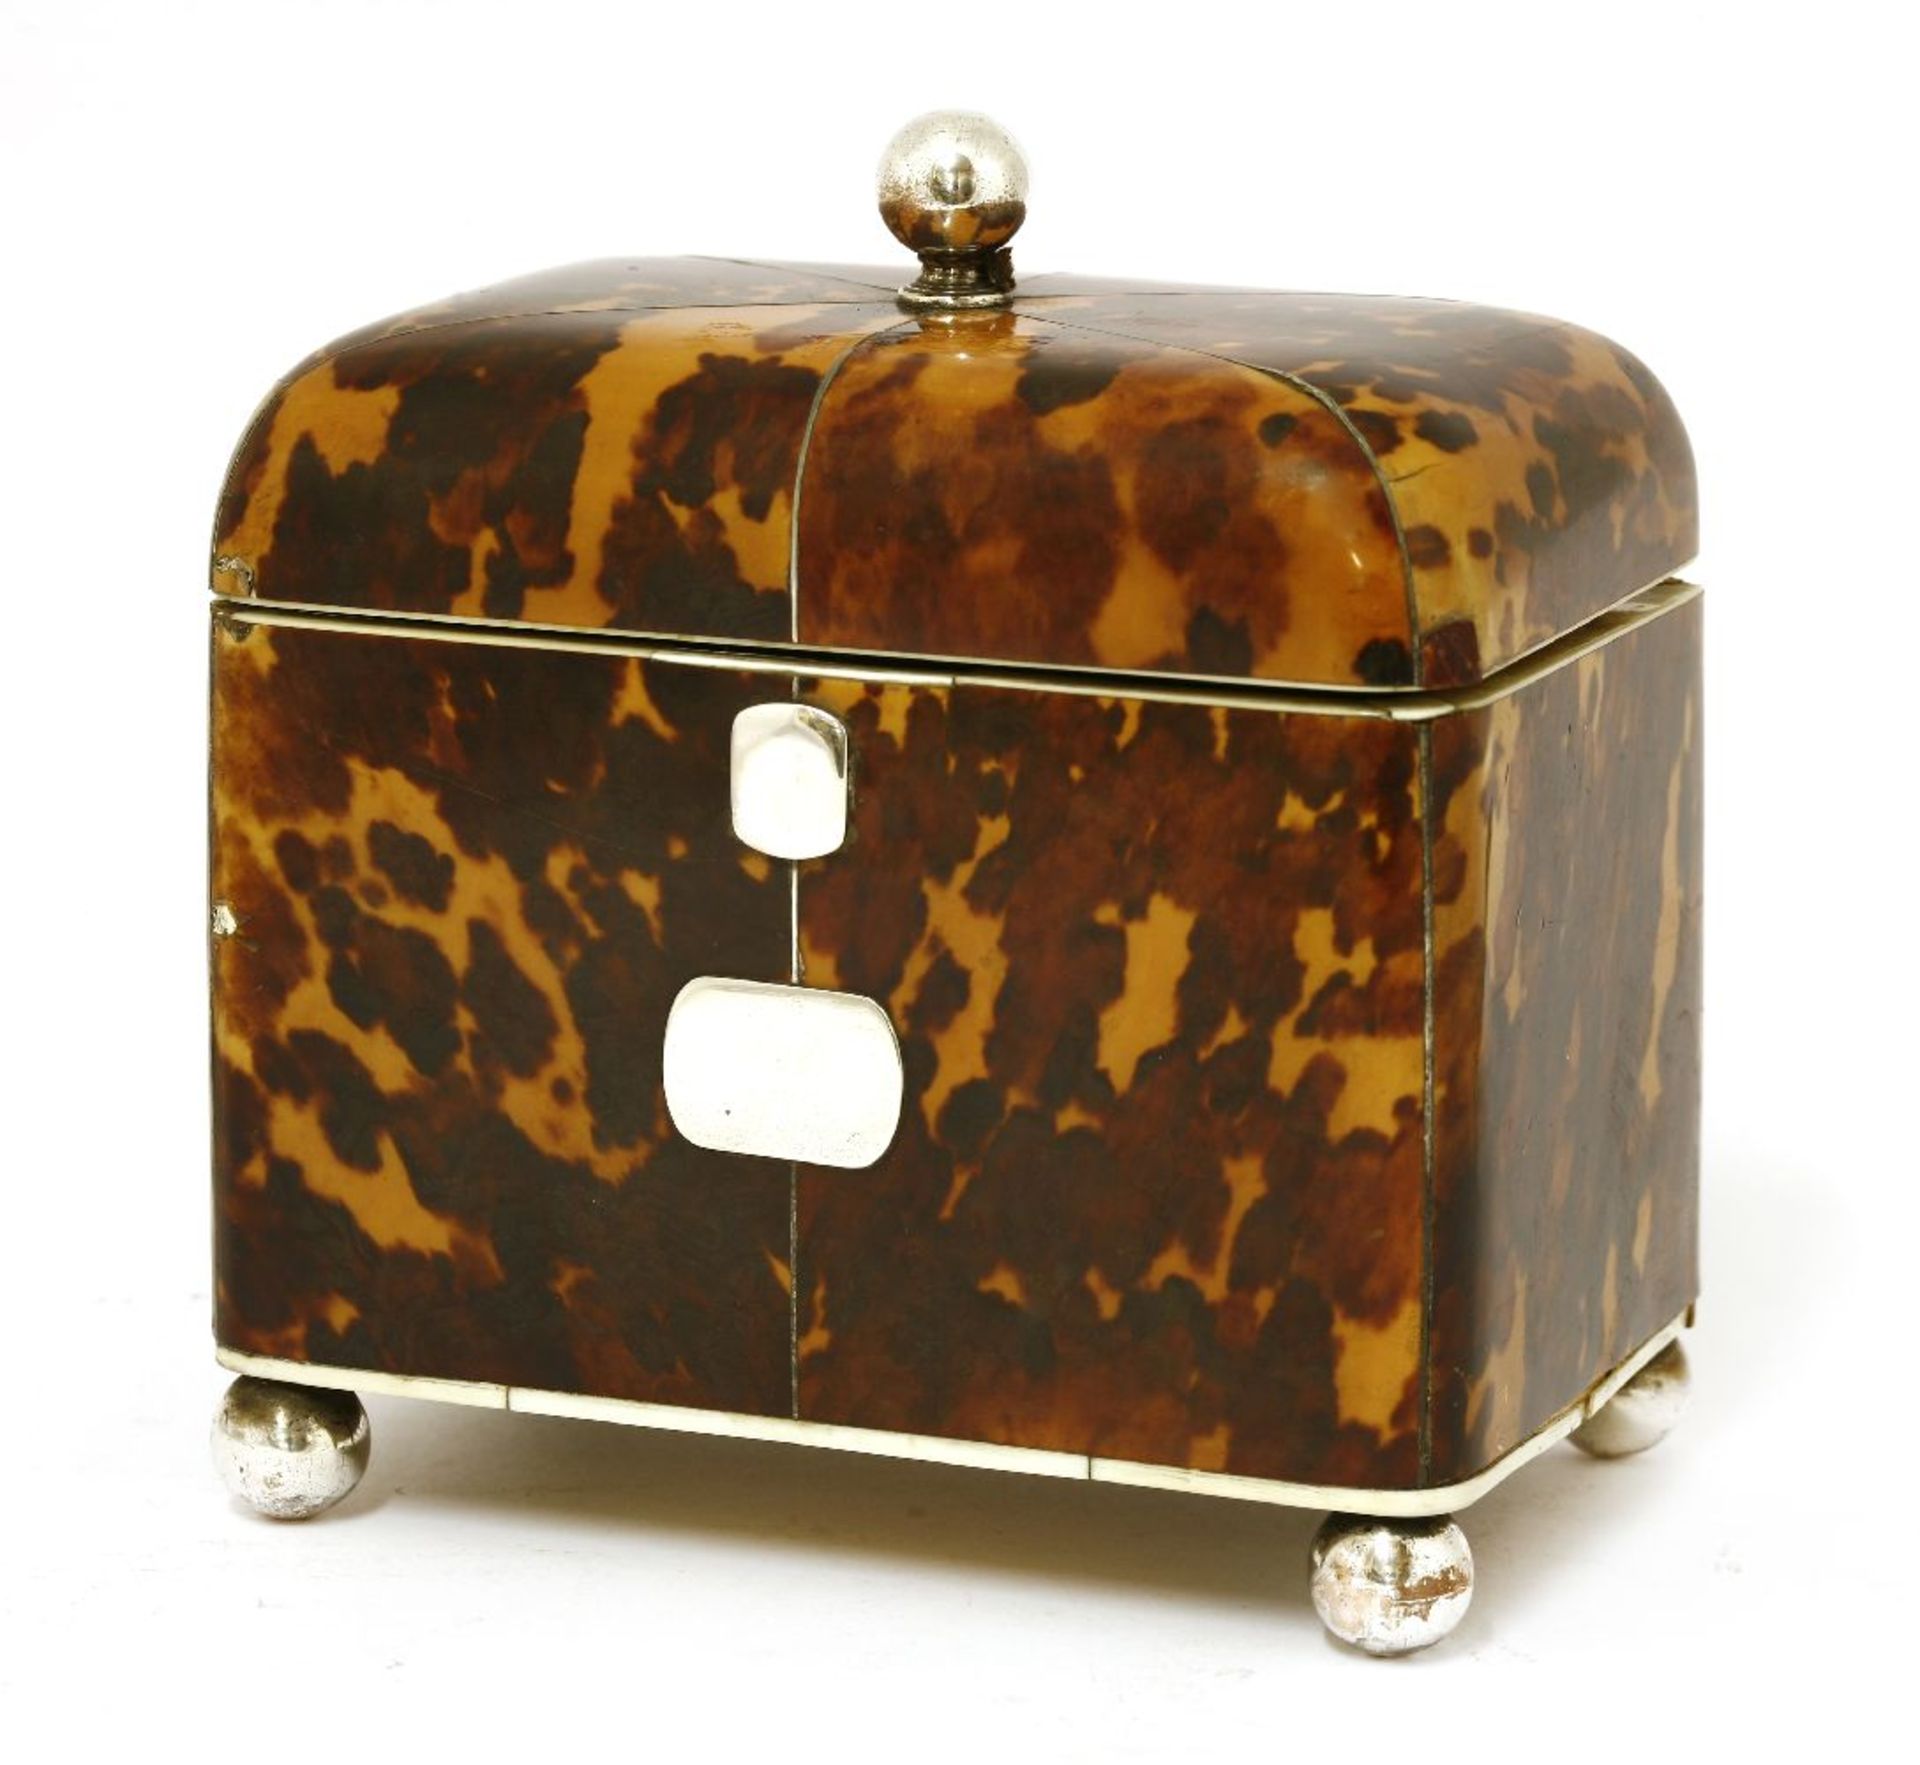 A tortoiseshell, ivory and white-metal-mounted tea caddy,early 19th century, with a ball finial over